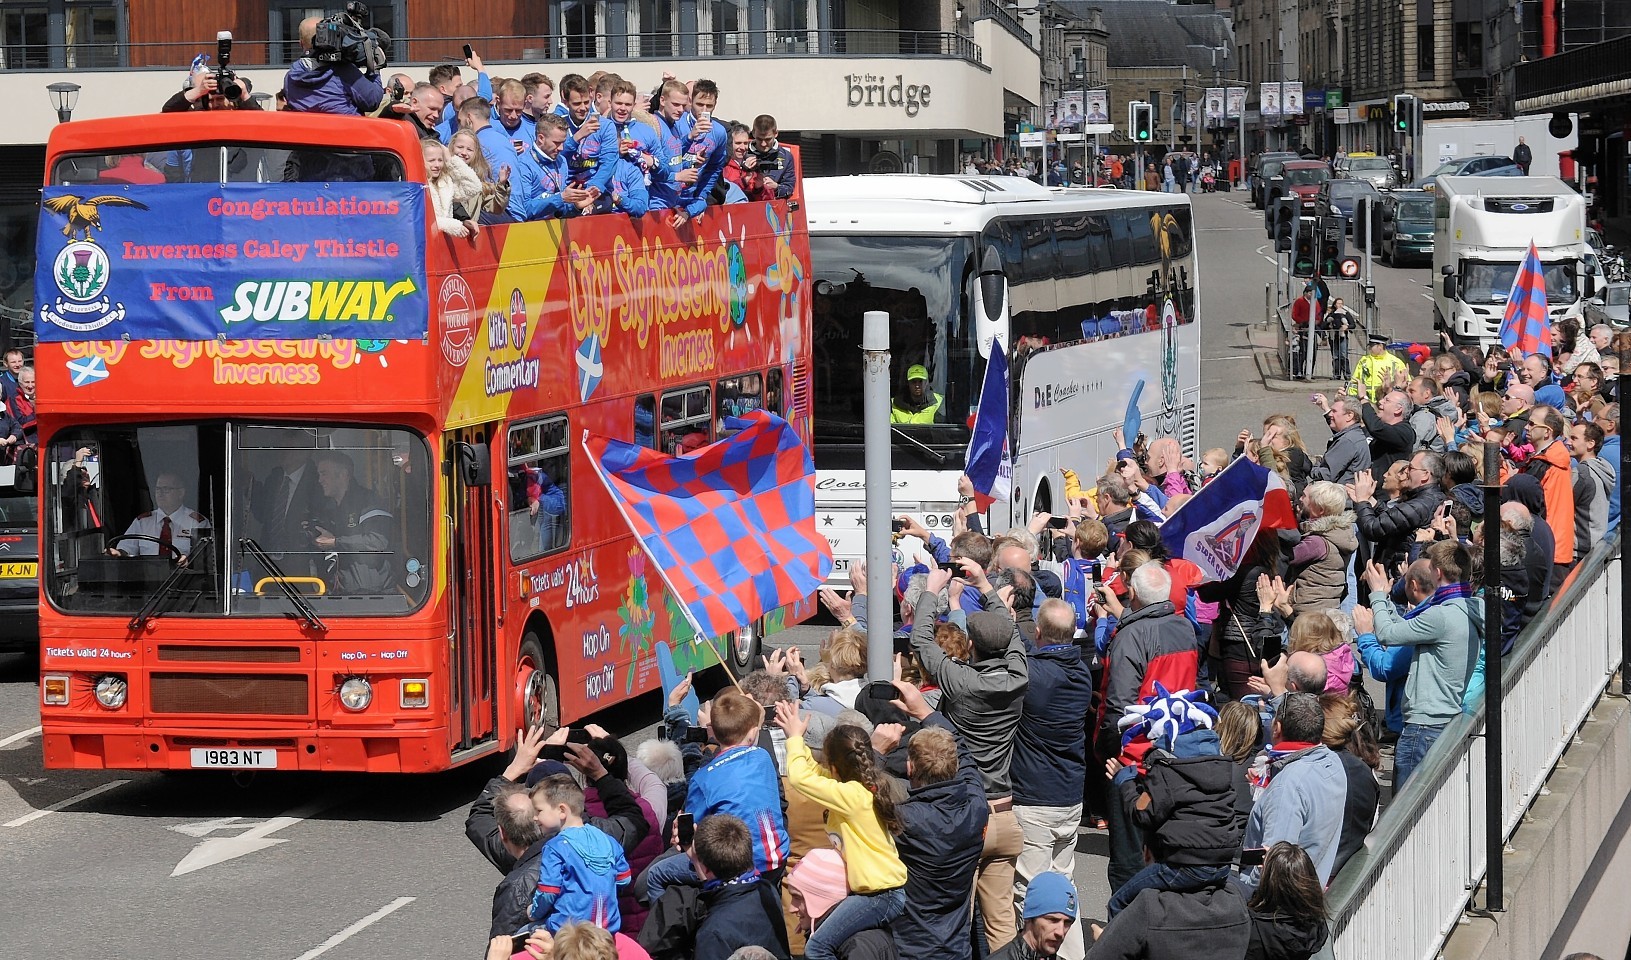 Caley Thistle players tour the city in an open top bus after their historic cup win